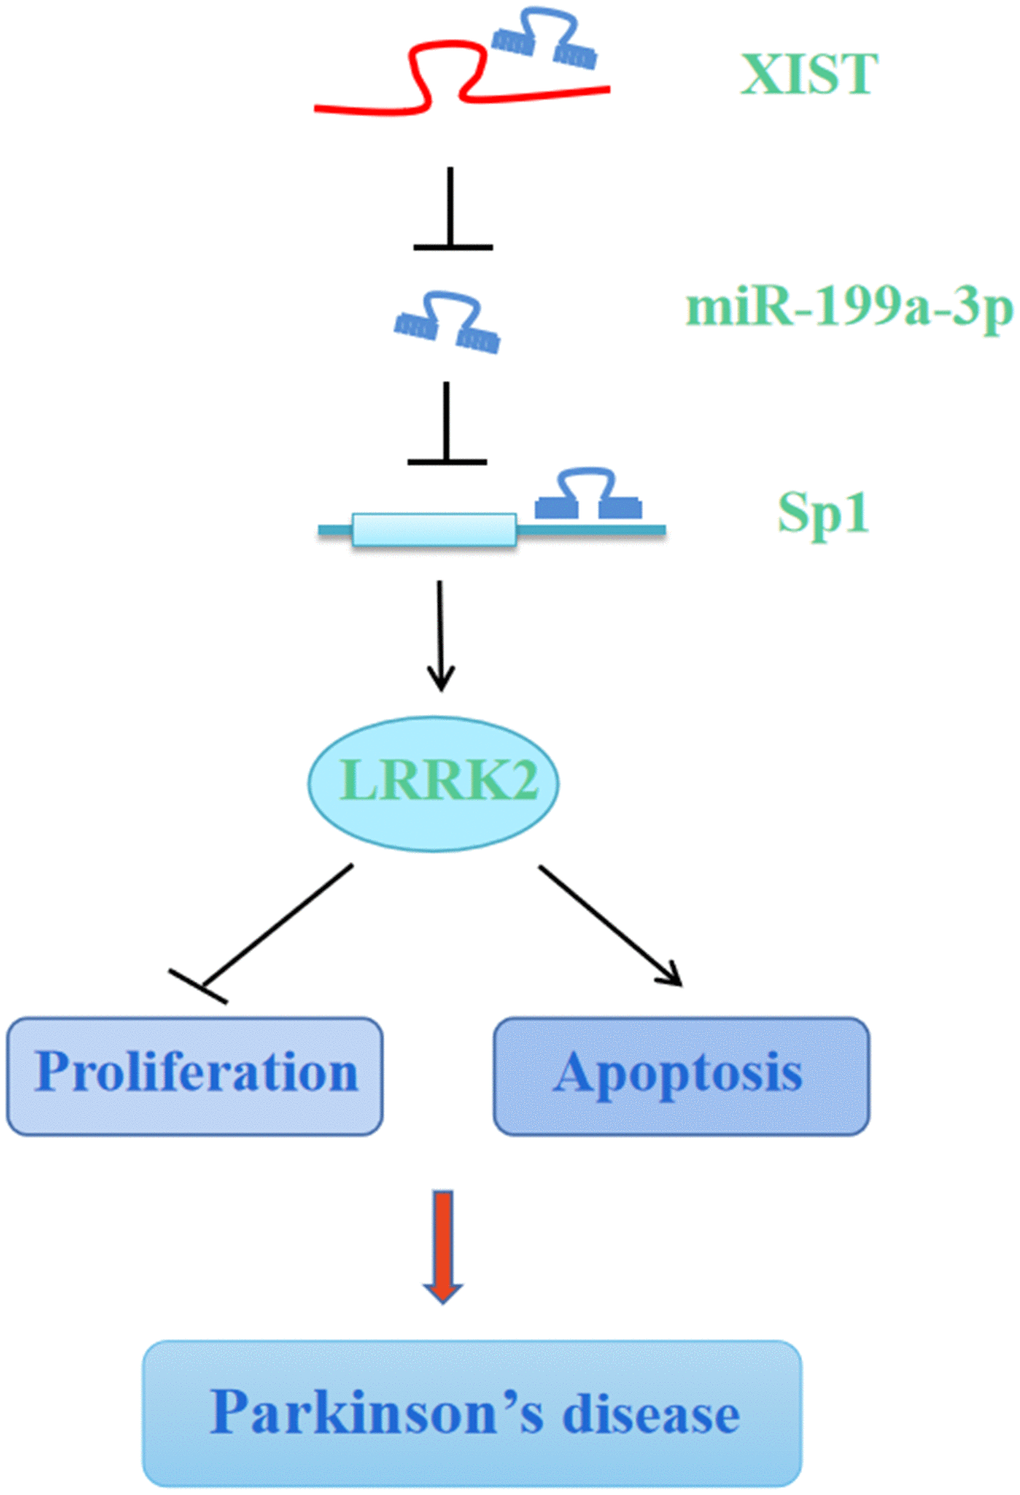 Graphic depiction of the conclusion from the present study. LncRNA XIST sponges miR-199a-3p to upregulate Sp1/LRRK2 axis to accelerate PD progression by inhibition of cell proliferation and promotion of cell apoptosis.